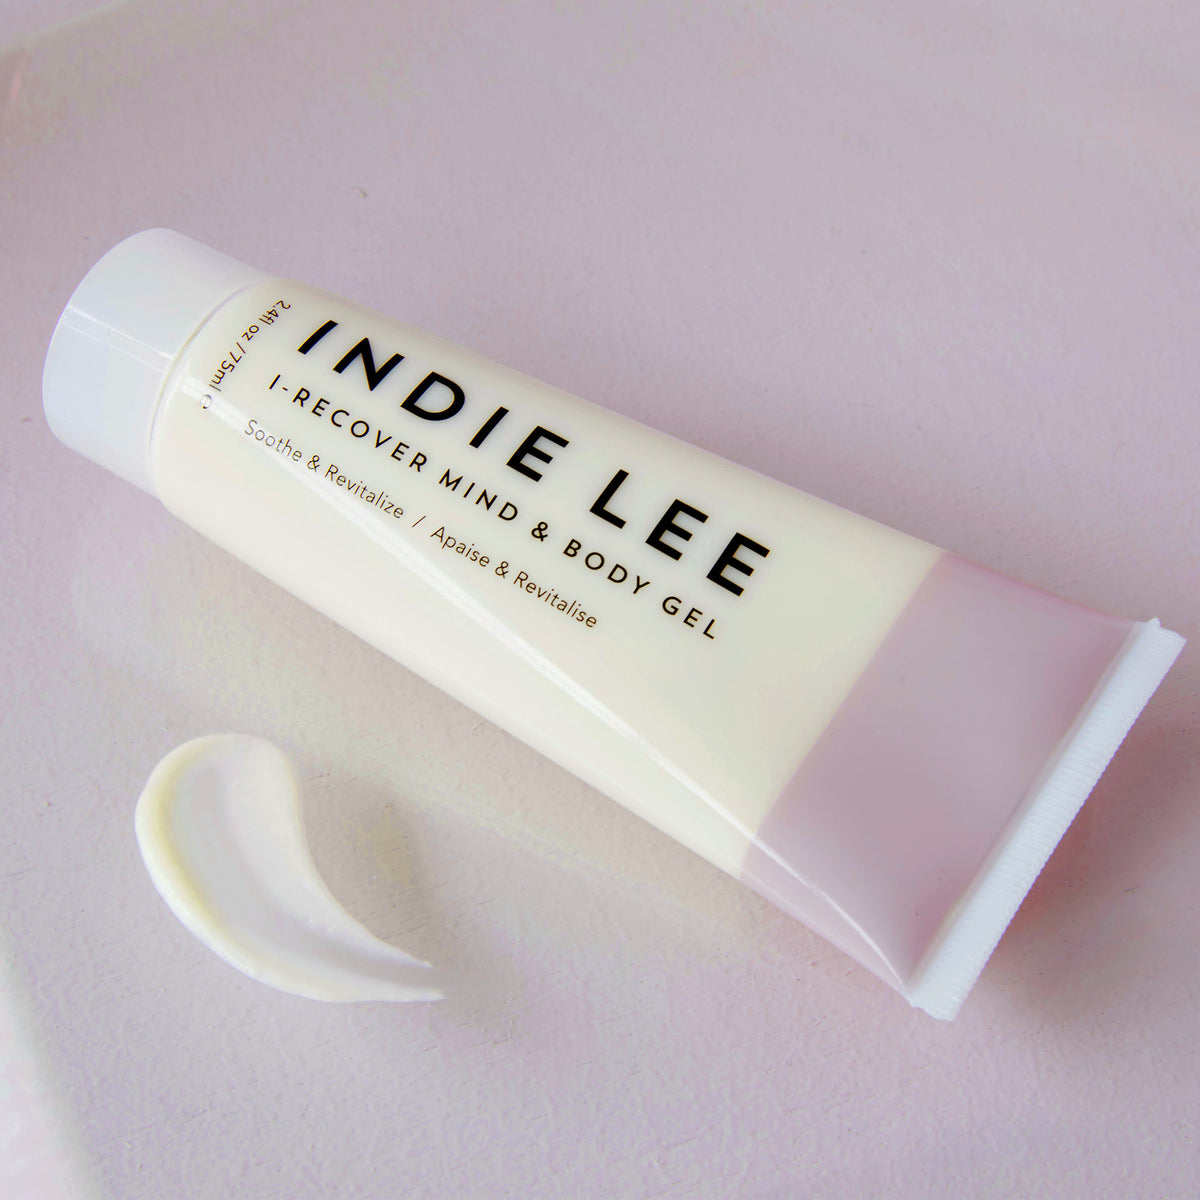 Indie Lee I-Recover Mind and Body Gel .